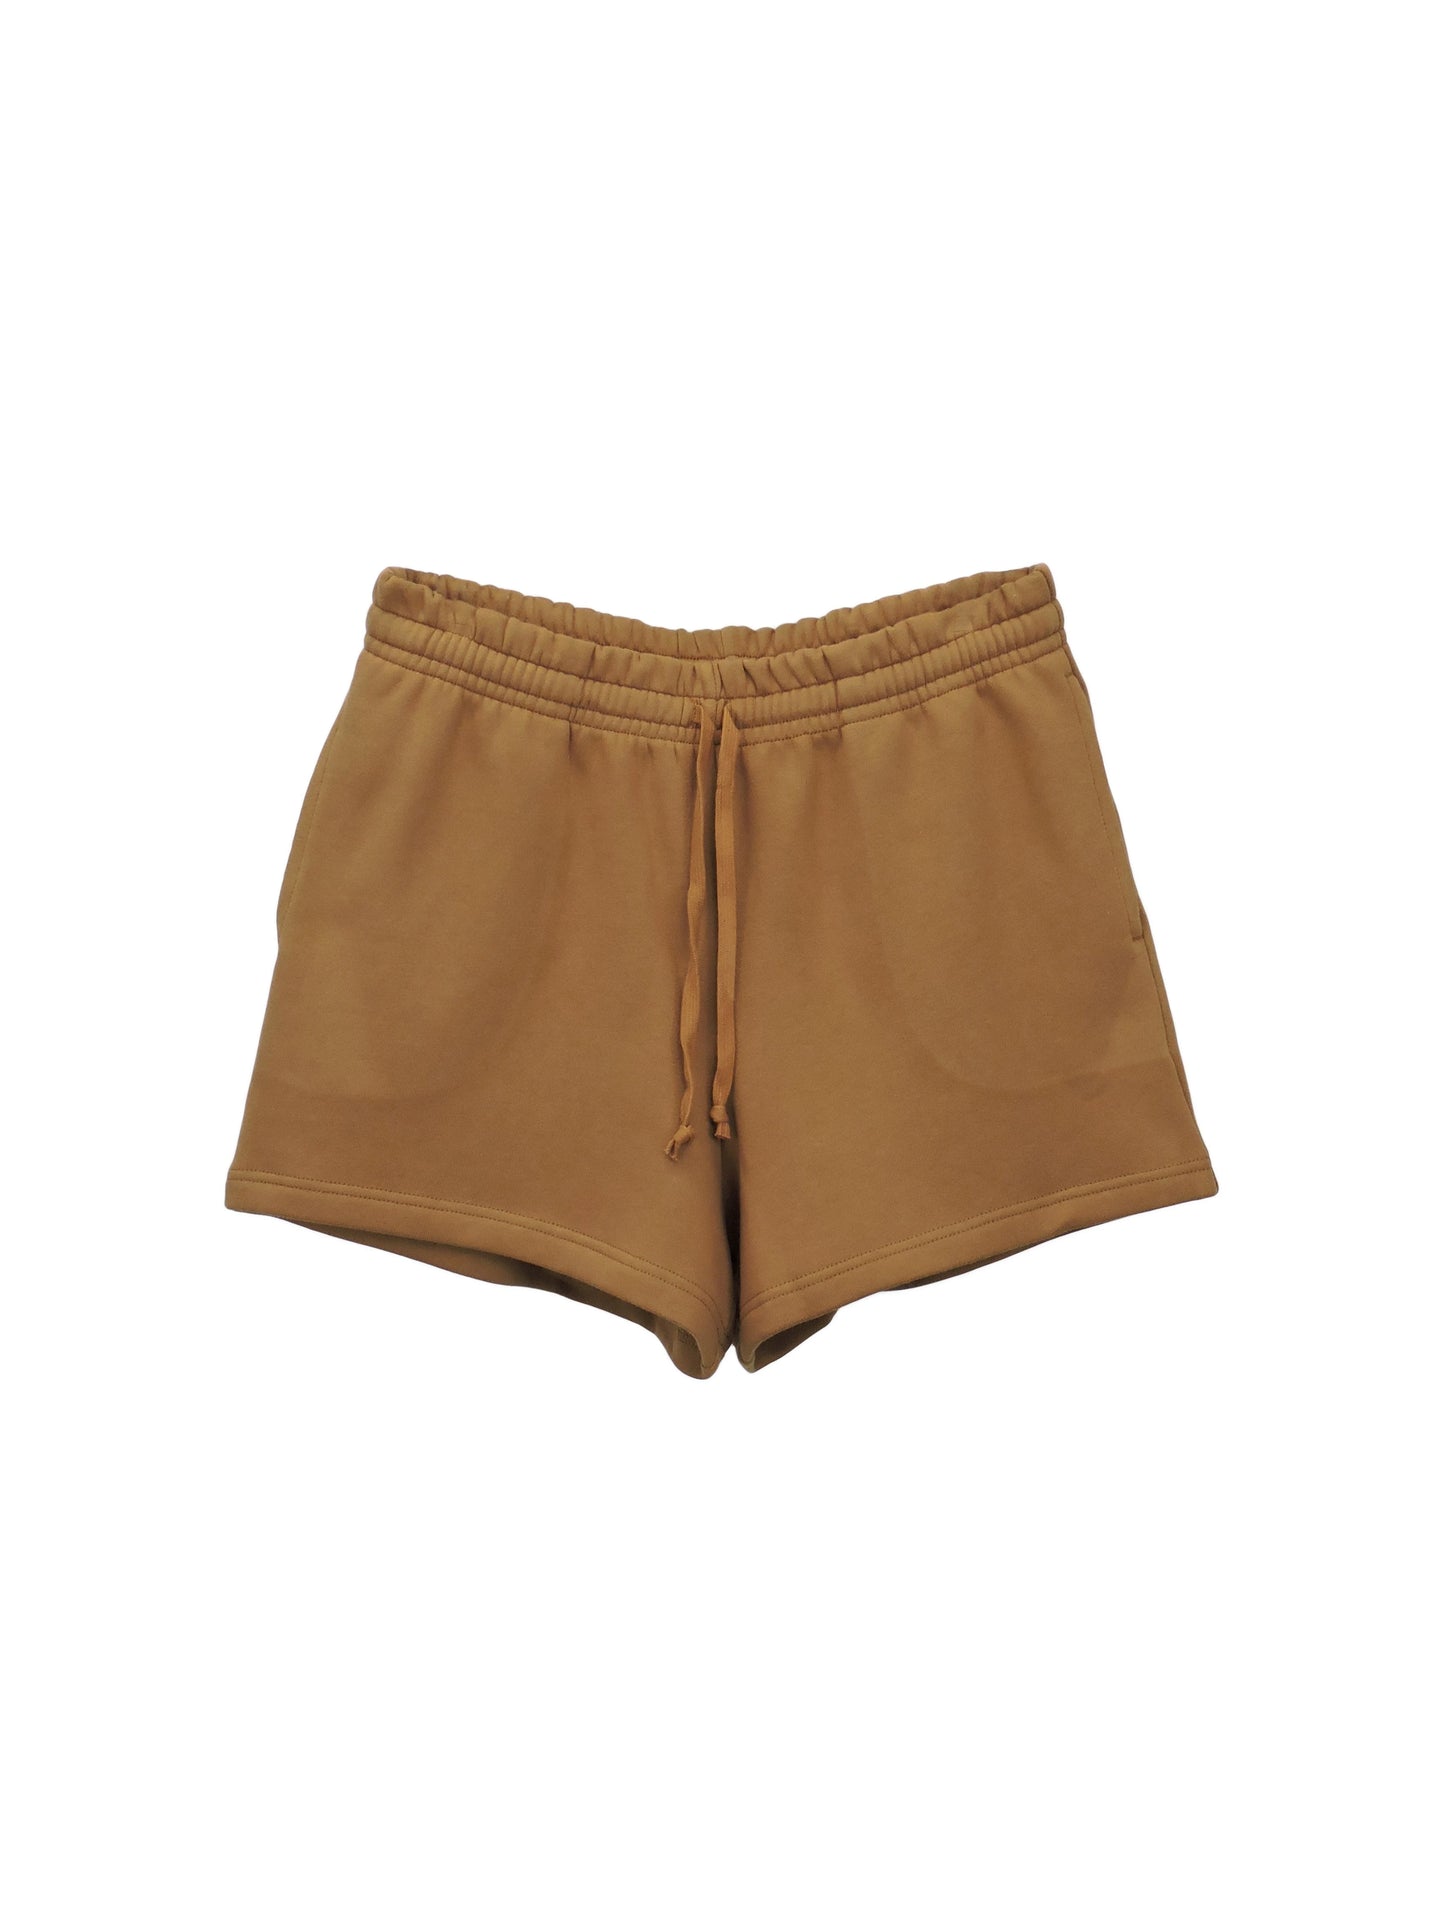 Groundhog brown short shorts with blended drawstrings, flexible waistband, and sidepockets